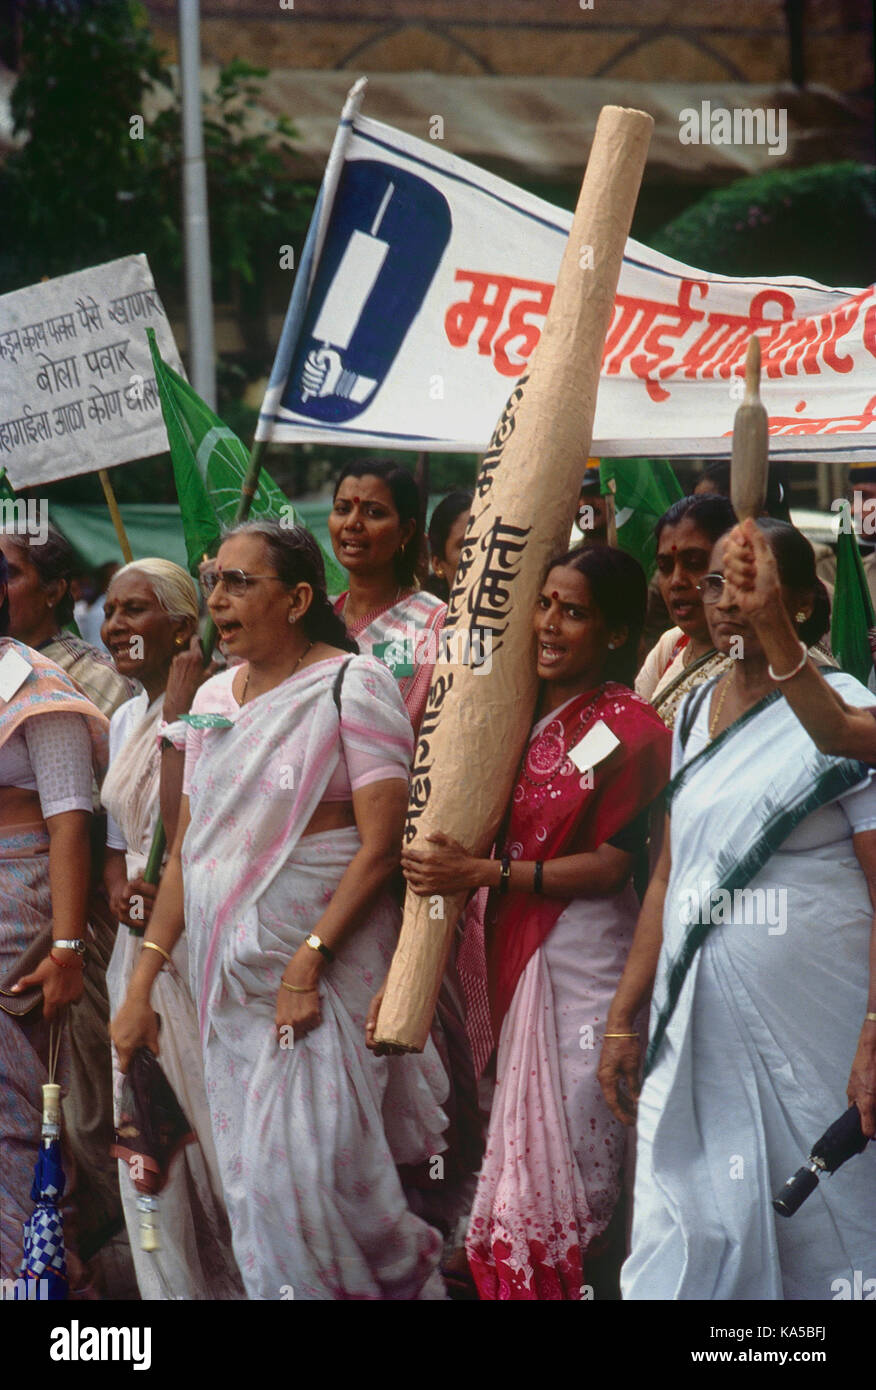 Women protest with rolling pin against high prices, mumbai, maharashtra, India, Asia Stock Photo